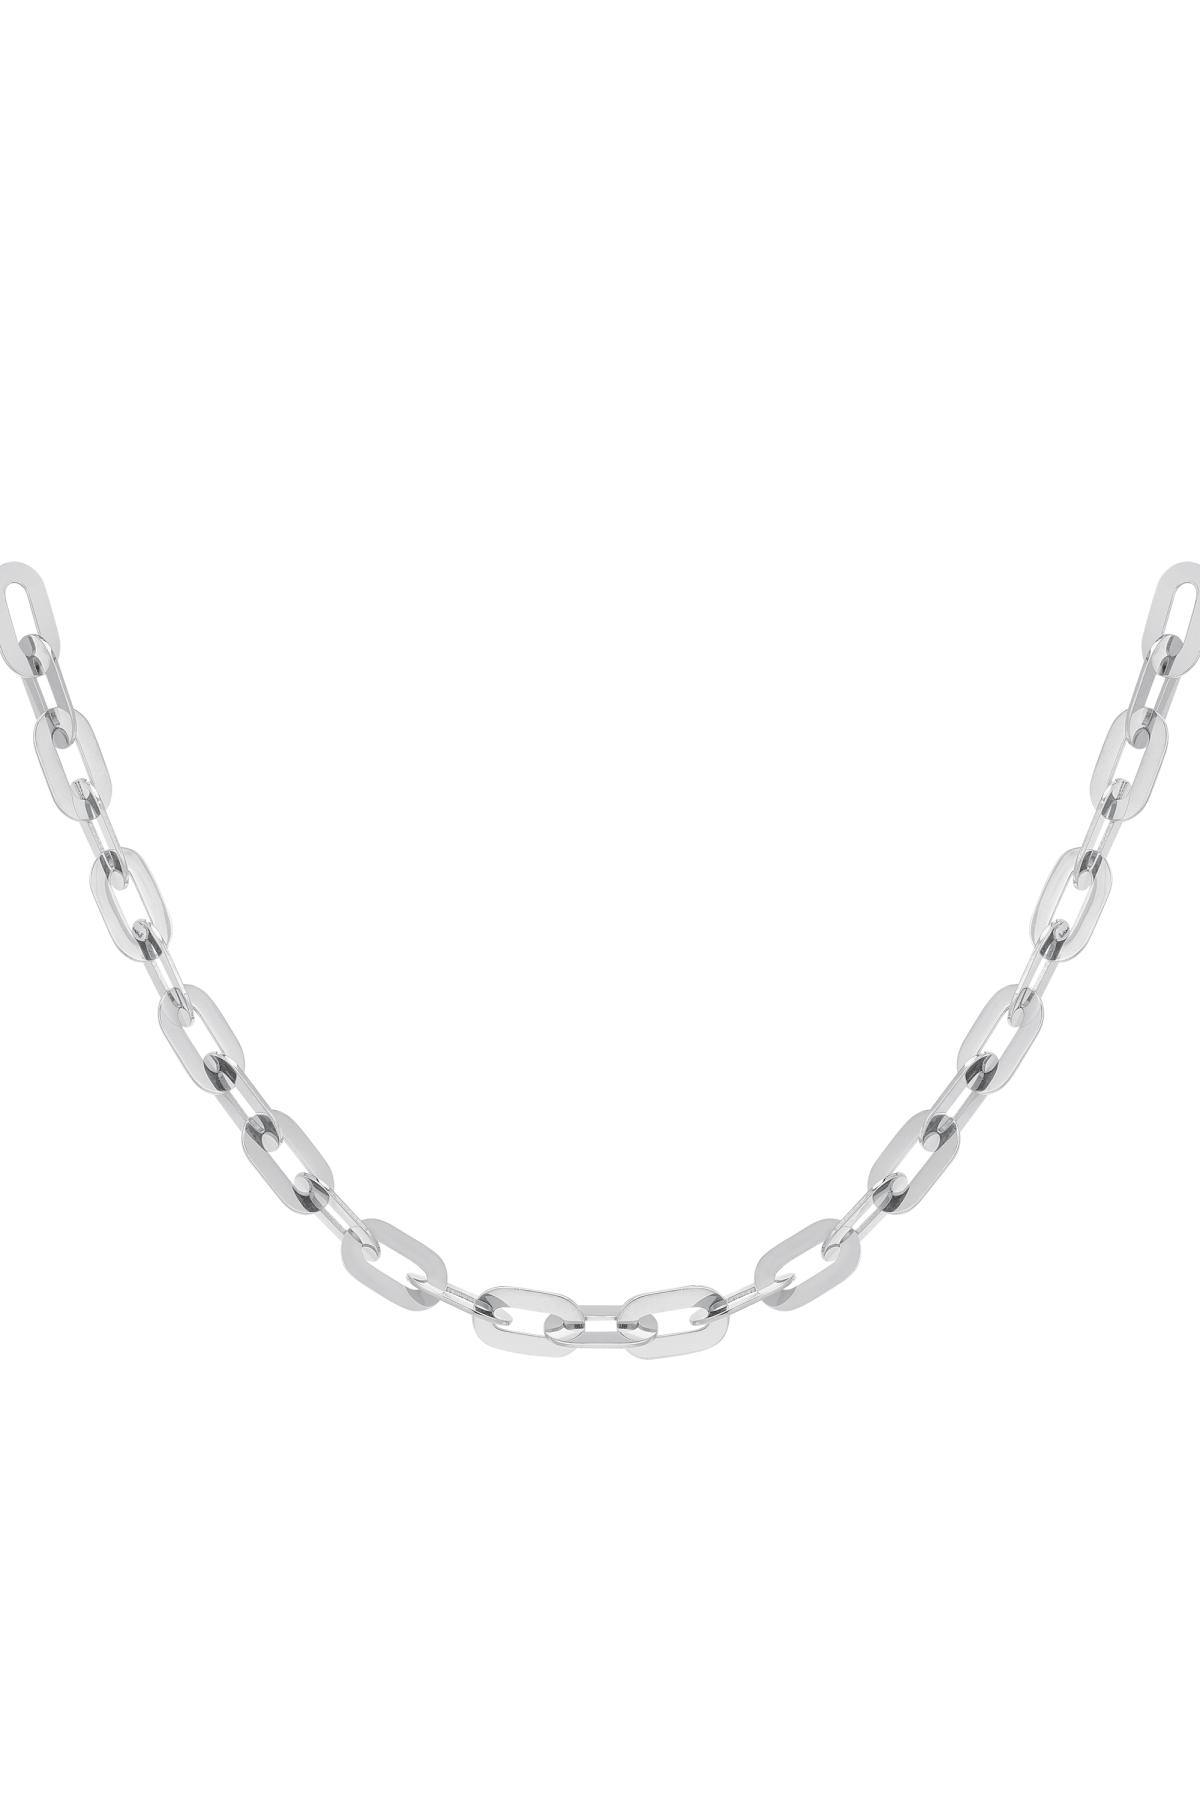 Chunky chain necklace Silver Stainless Steel